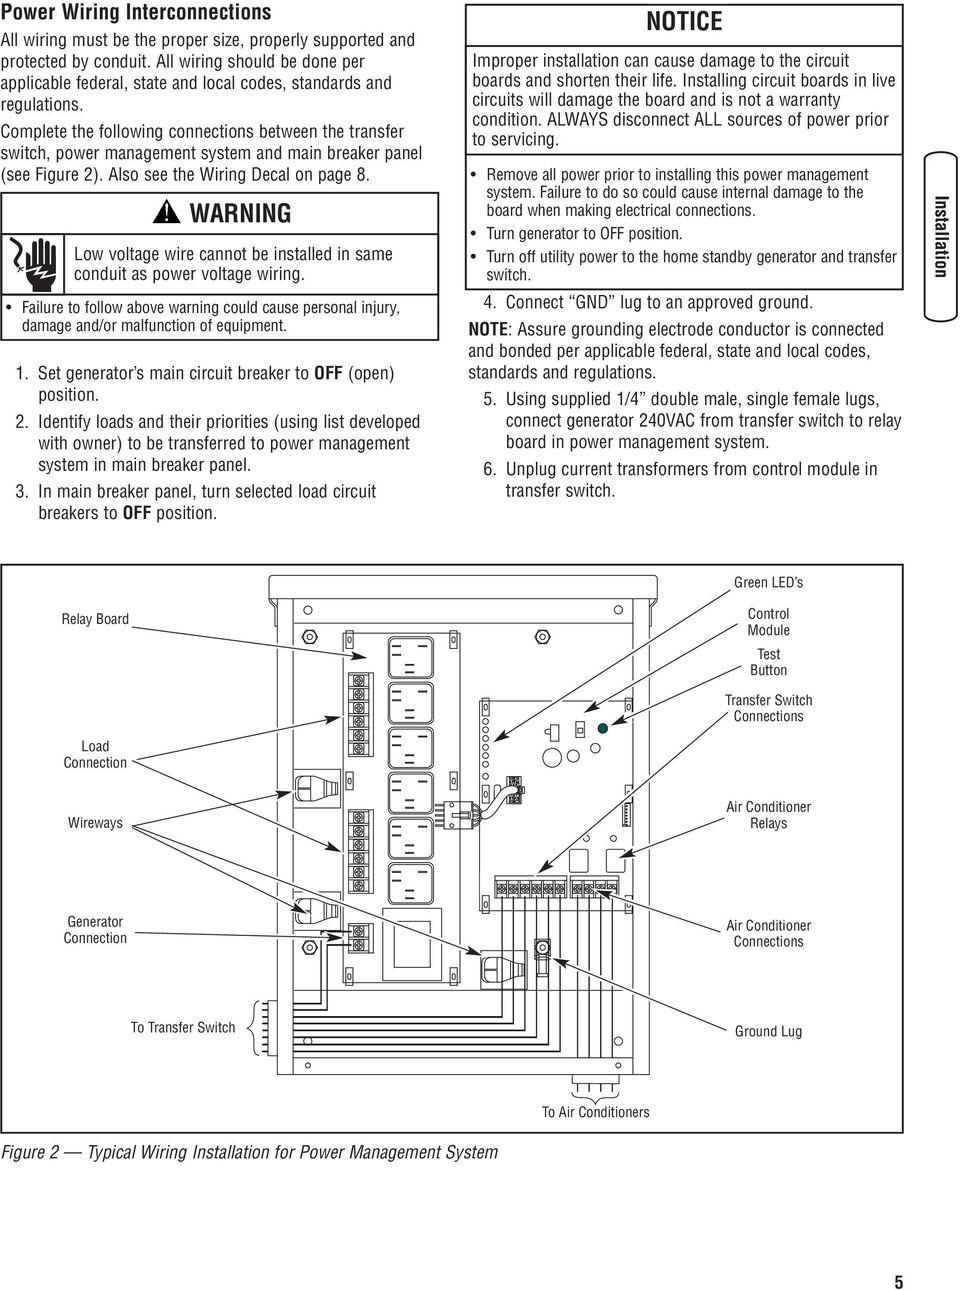 Complete the following connections between the transfer switch, power management system and main breaker panel (see Figure 2). Also see the Wiring Decal on page 8.